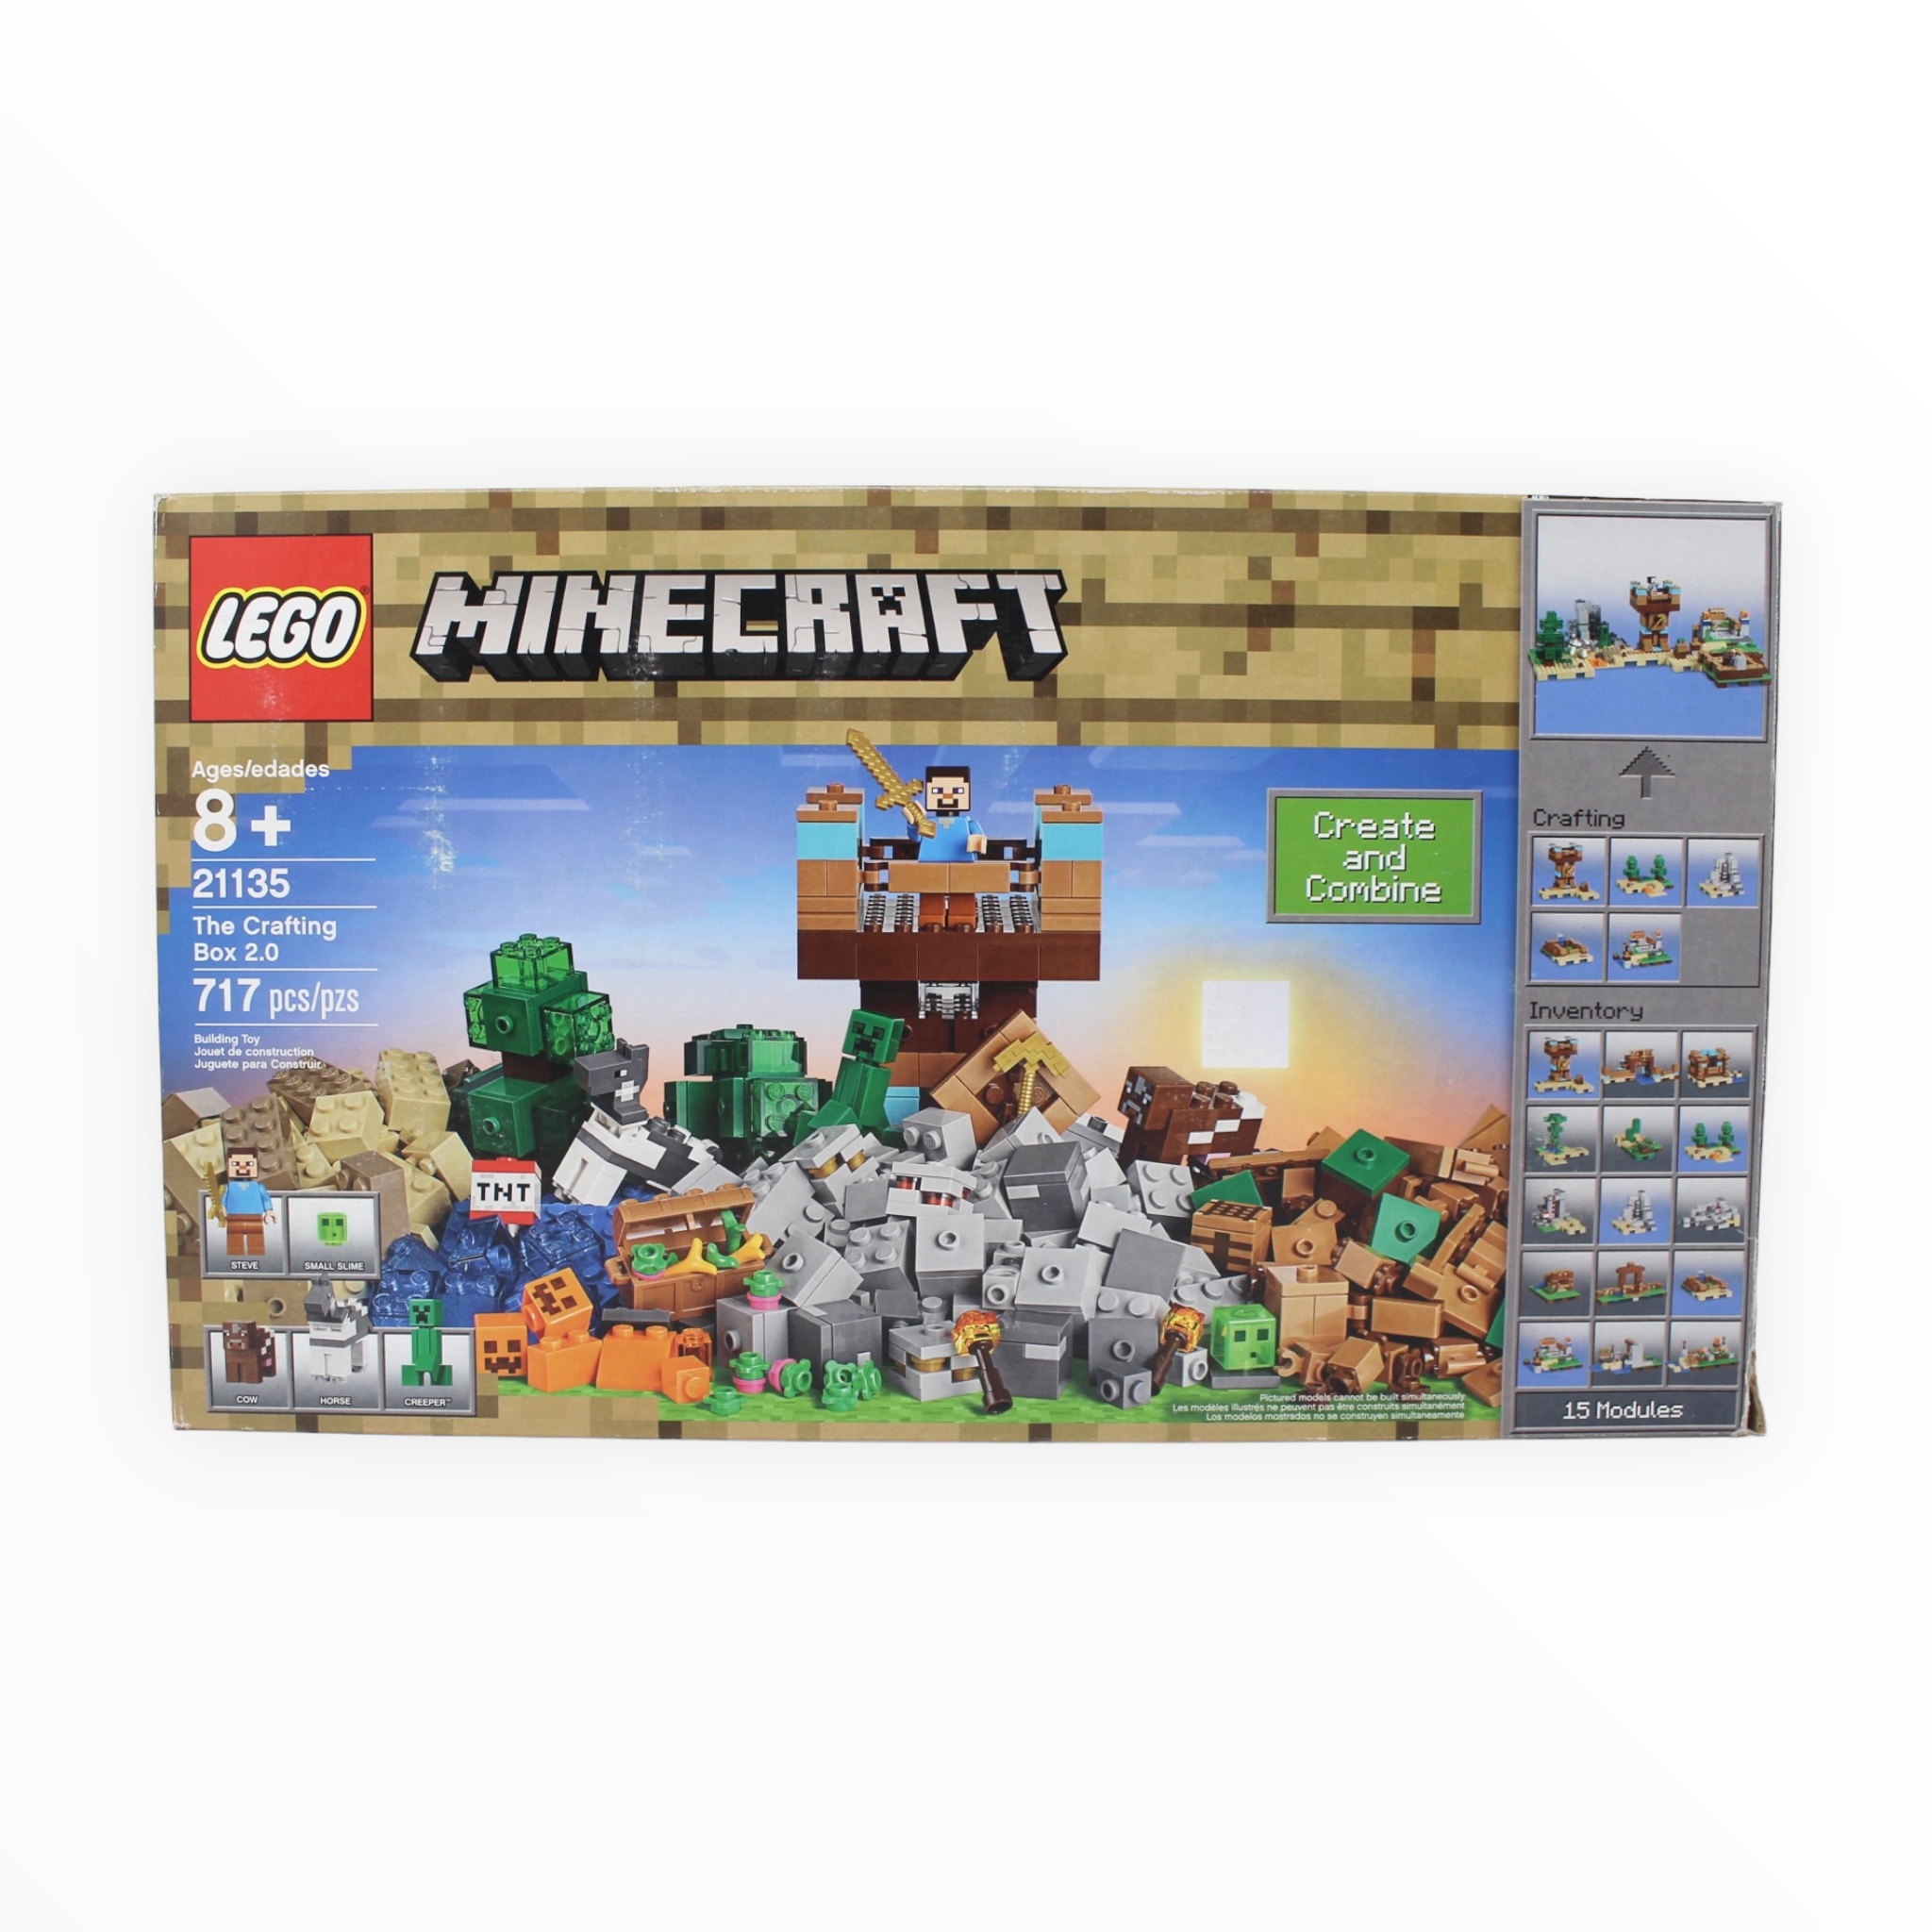 Certified Used Set 21135 Minecraft The Crafting Box 2.0